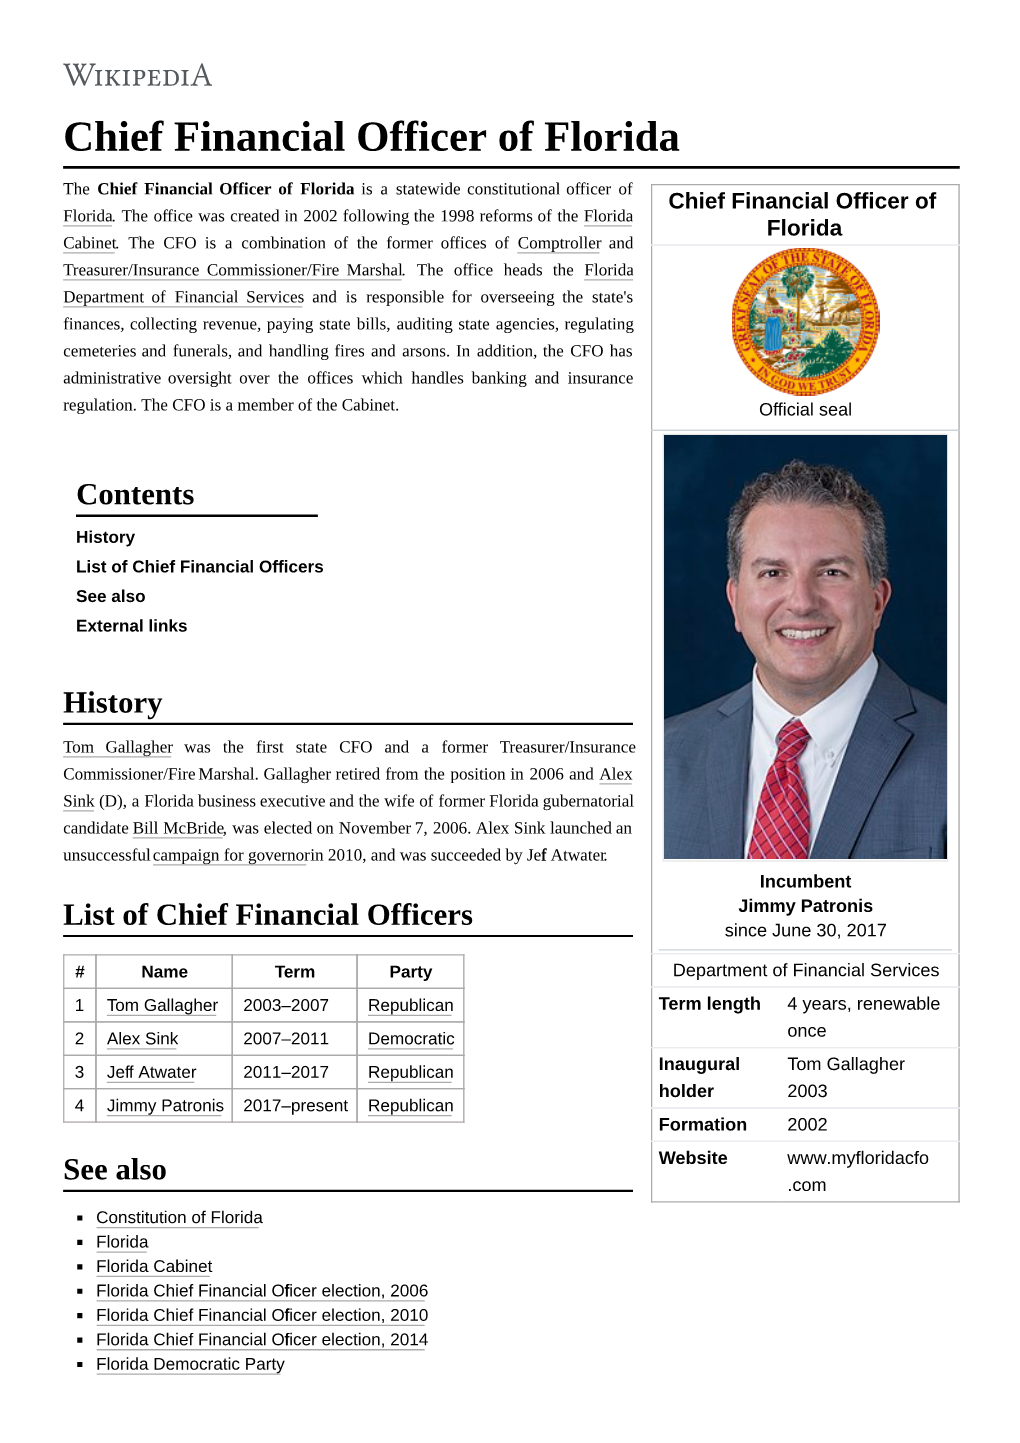 Chief Financial Officer of Florida